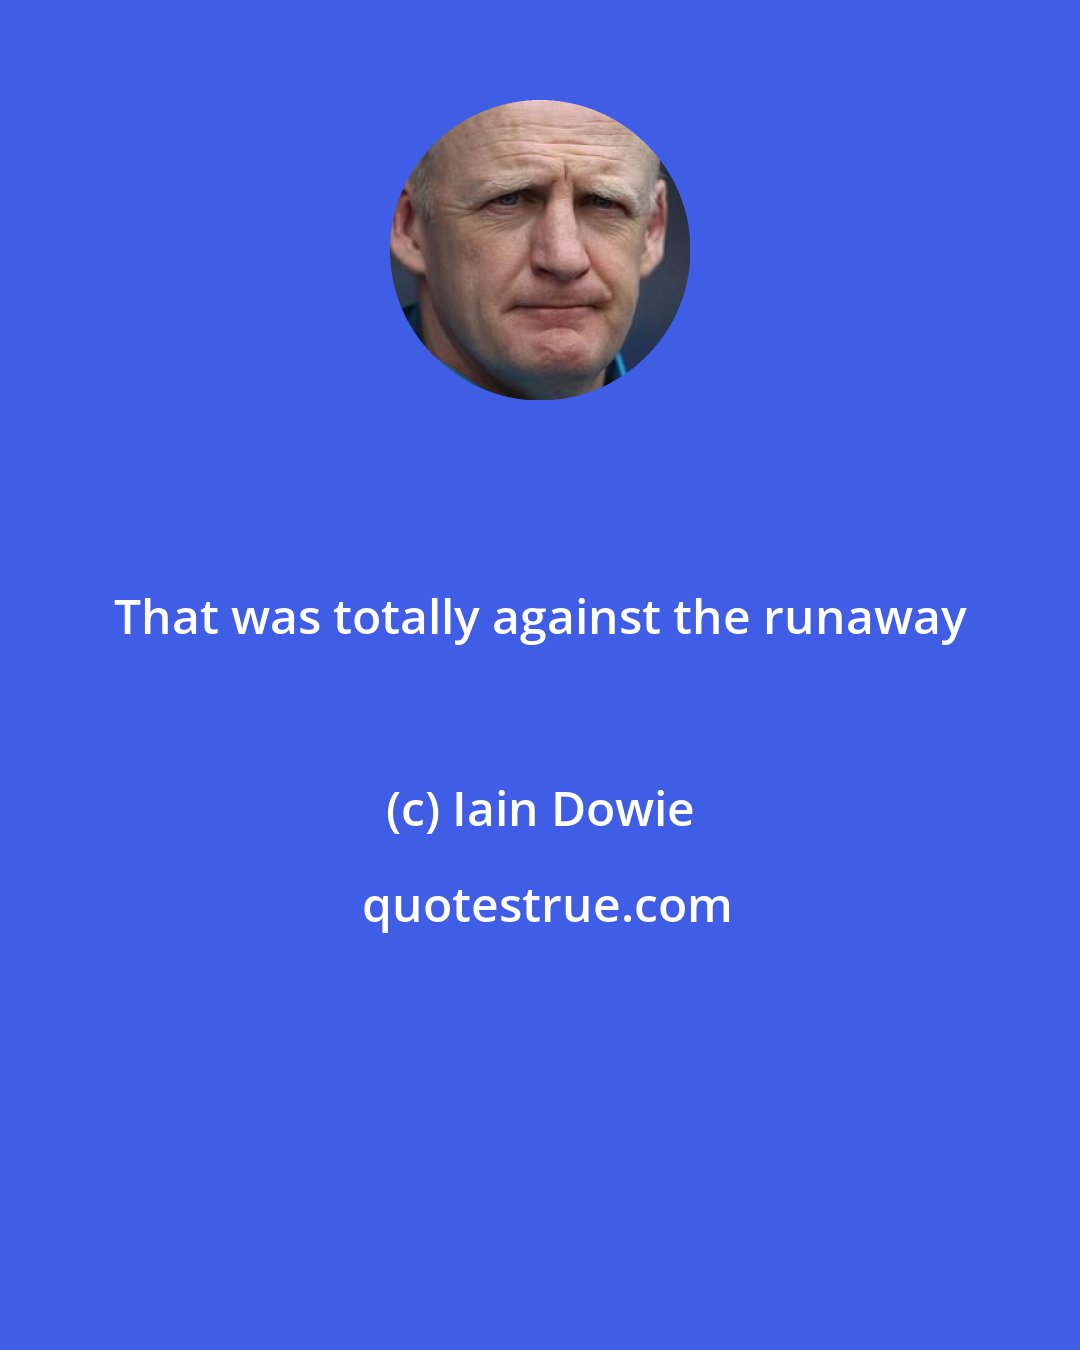 Iain Dowie: That was totally against the runaway